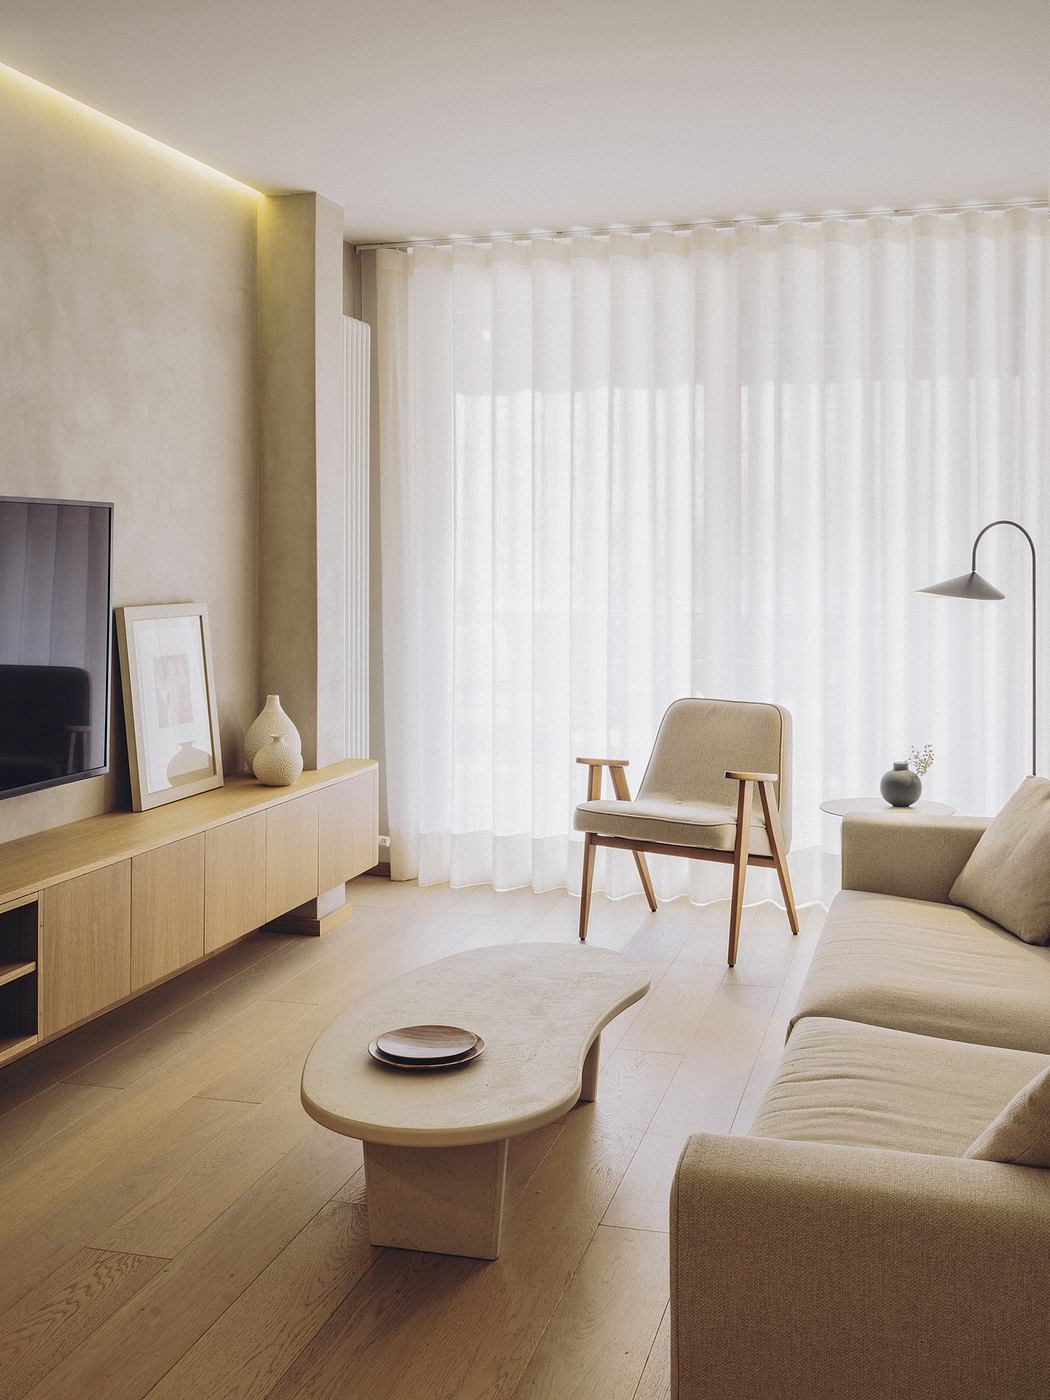 Tranquil living space with clean lines, neutral tones, and natural wood accents.